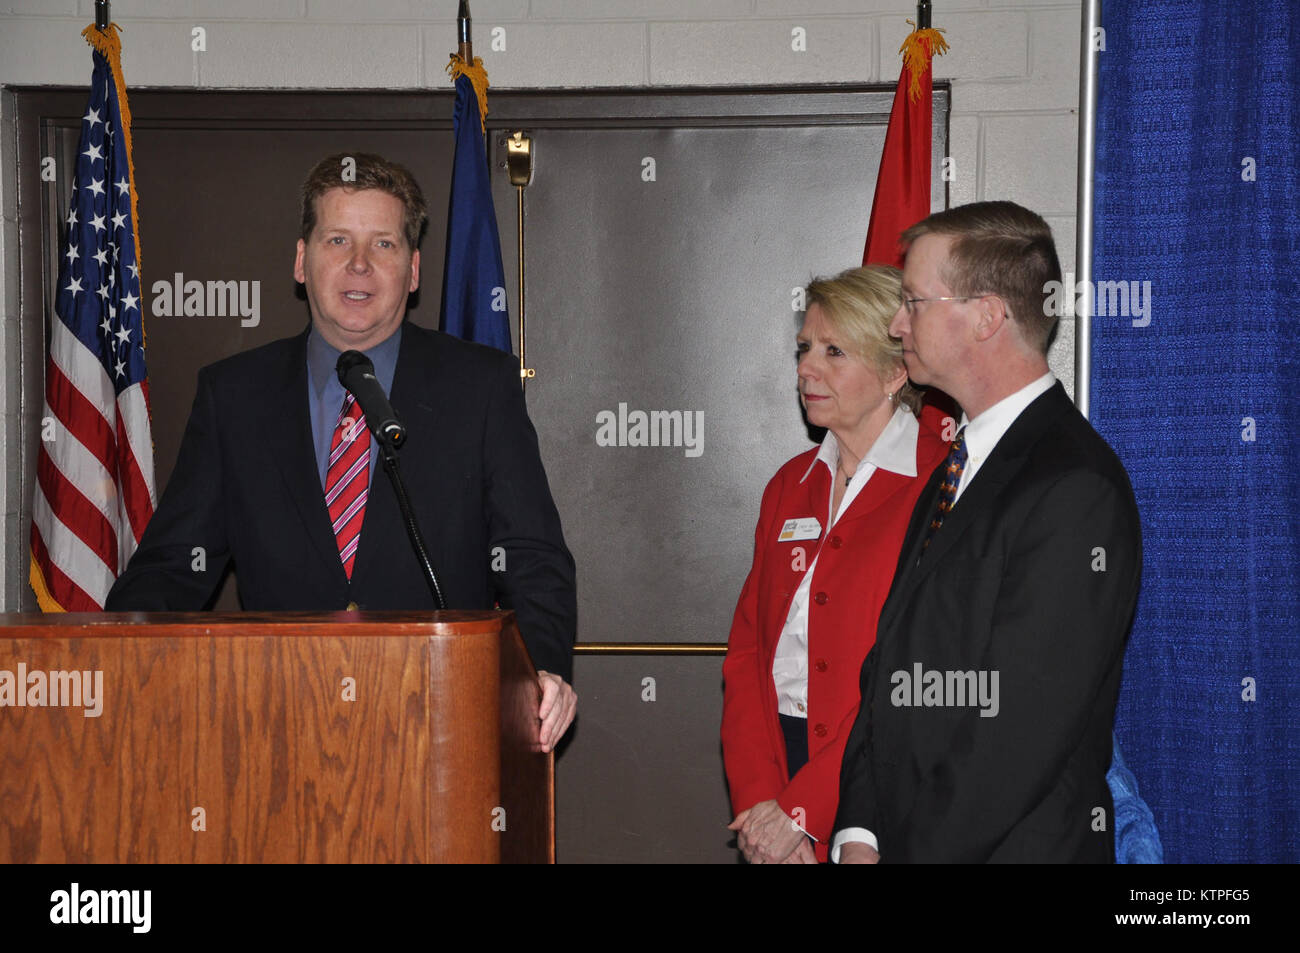 Mark Eagan, President and CEO of the Albany-Colonie Chamber of Commerce speaks during the opening of a Hiring our Heroes job fair sponsored by the U.S. Chamber of Commerce Foundation and hosted by the New York National Guard at New York State Division of Military and Naval Affairs headquarters in Latham, N.Y. on March 5, 2015. (U.S. Army National Guard photo by Master Sgt. Corine Lombardo/Released) Stock Photo